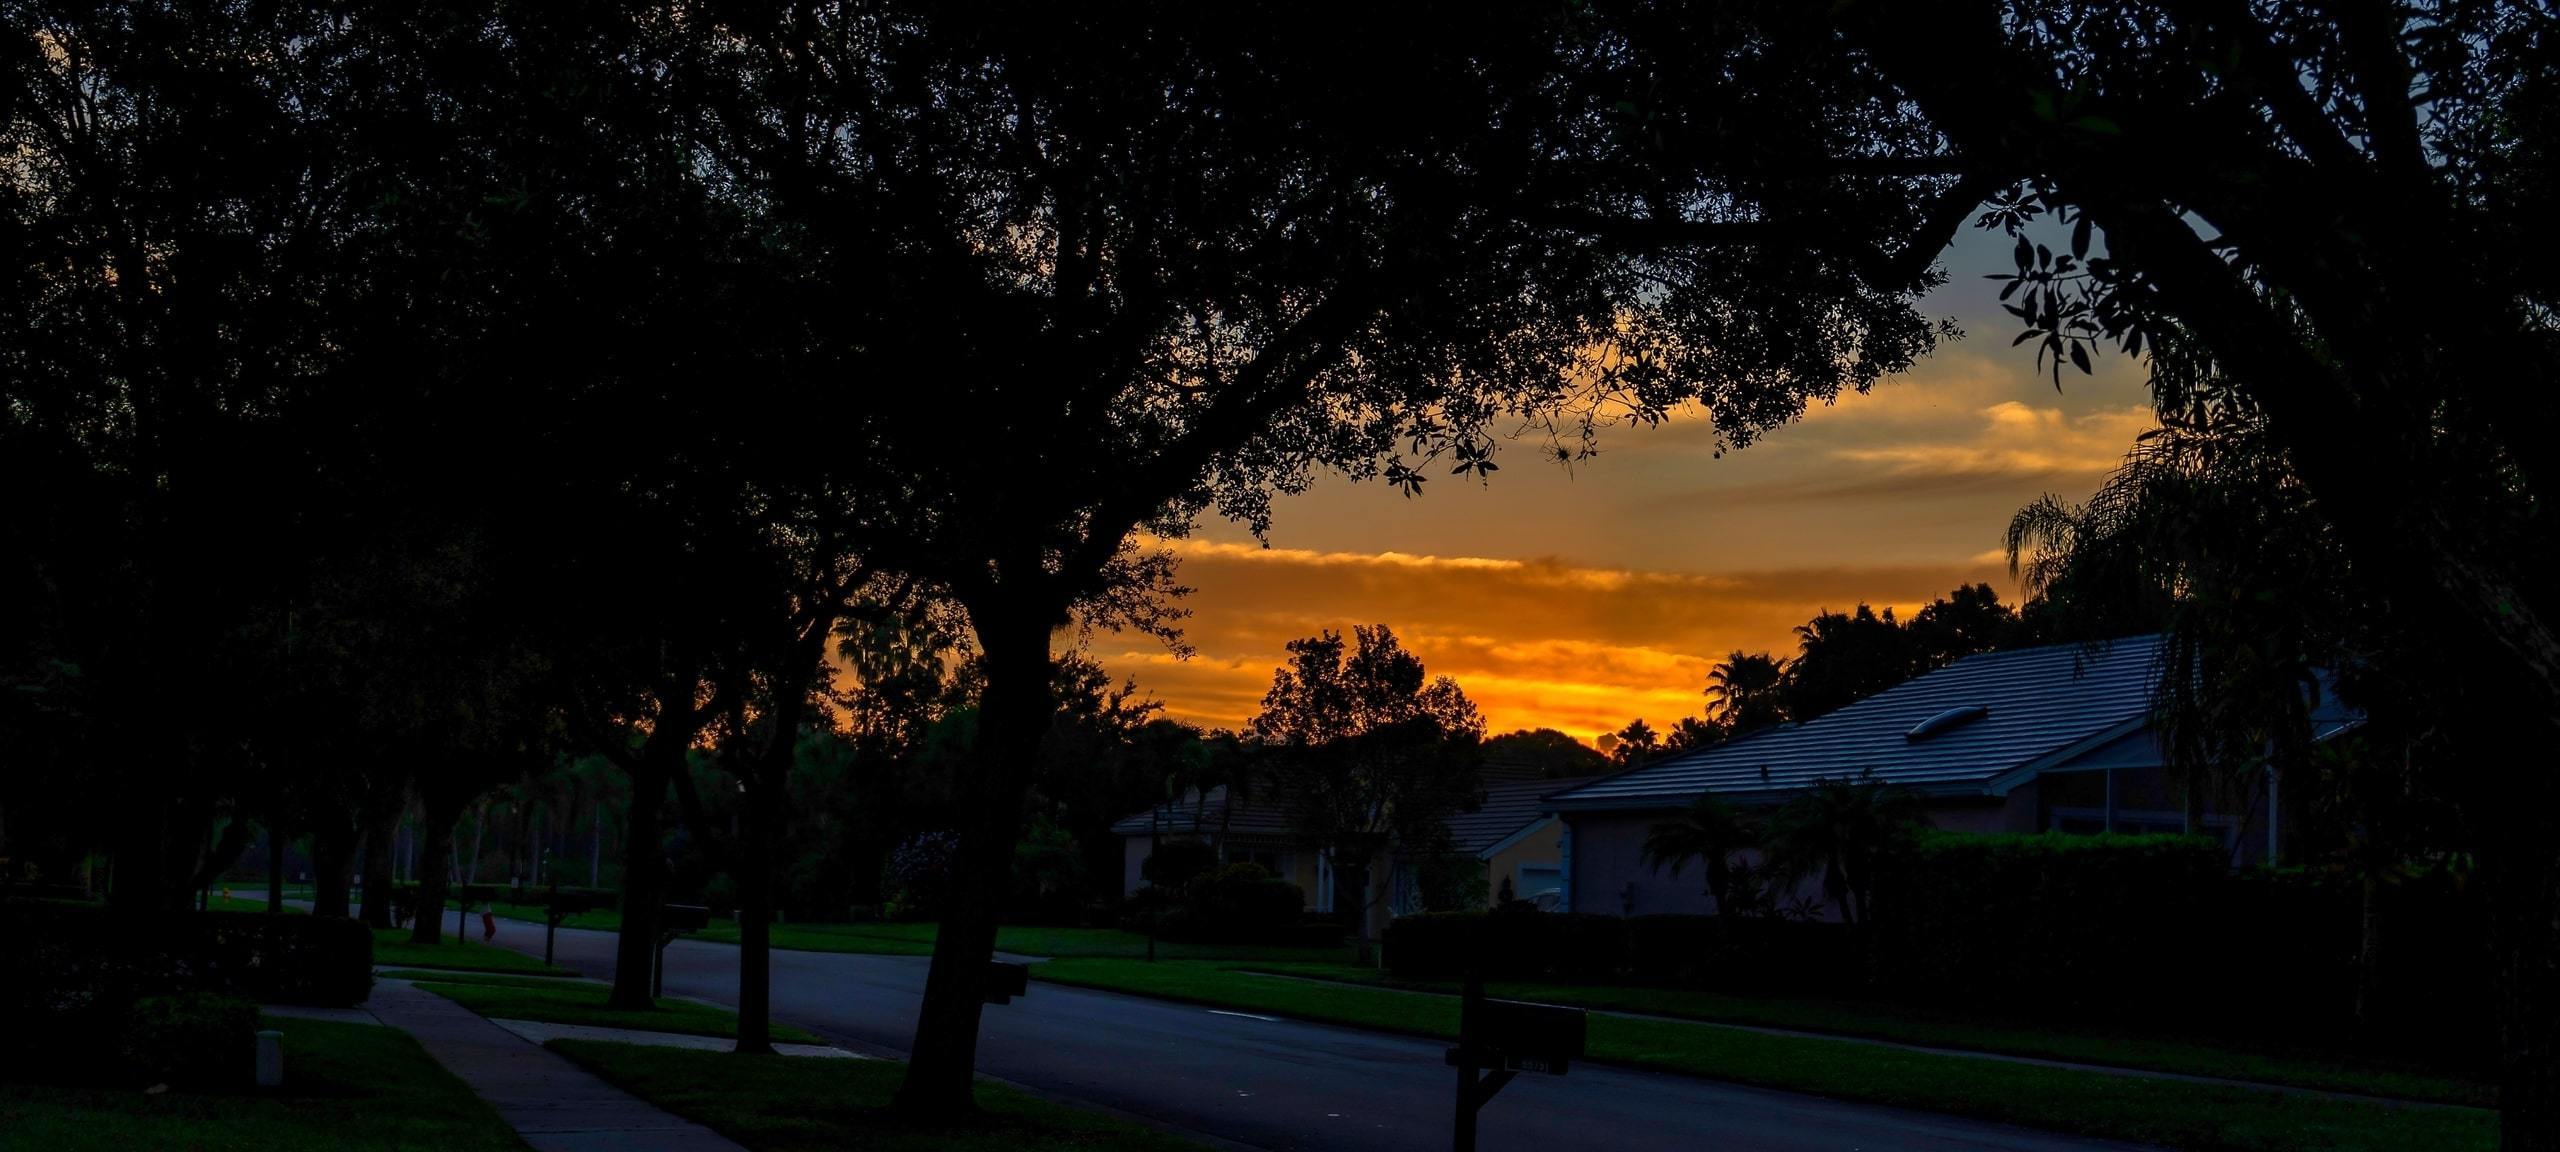 Sunset through silhouettes of trees on residential golf area street, Orlando